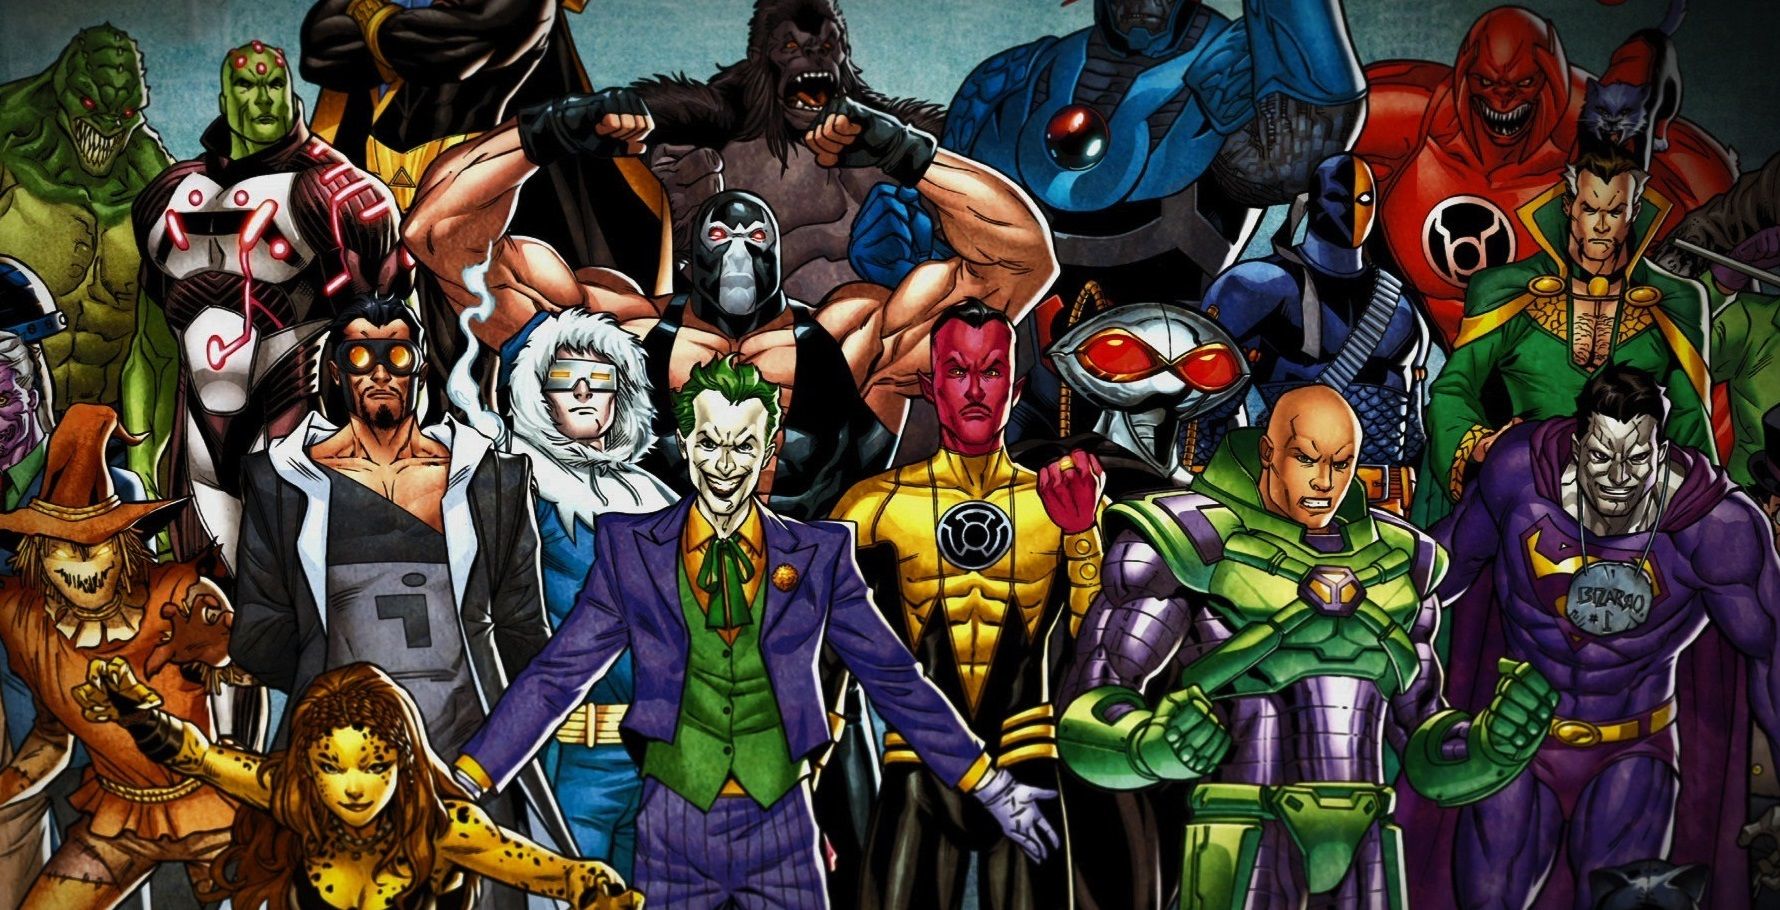 10 Iconic DC Comics Villains We Want To See Done Right In The DCEU